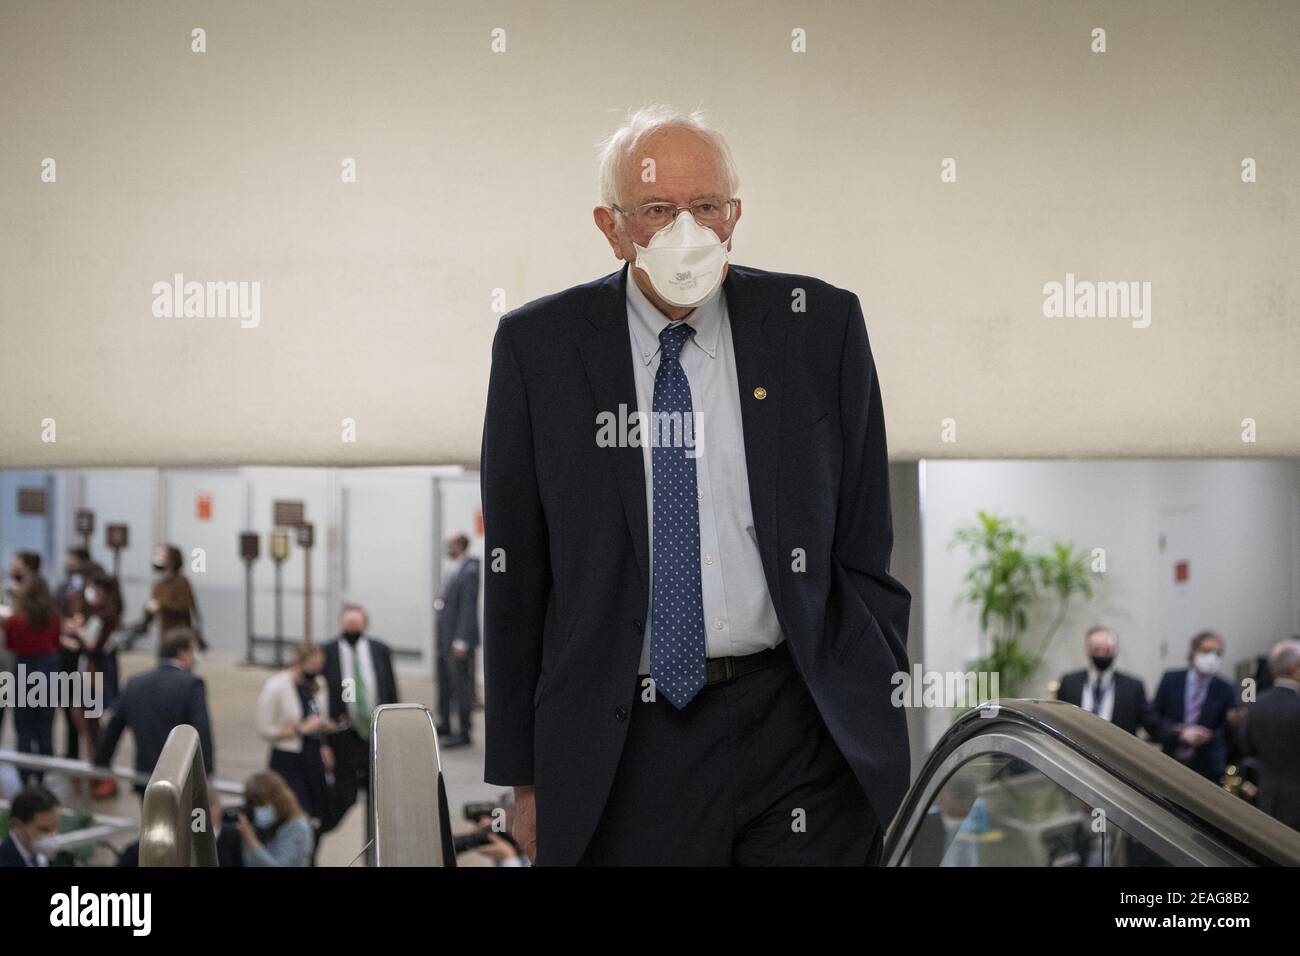 Washington, United States. 09th Feb, 2021. Sen. Bernie Sanders, I-Vt., walks through the Senate subway on the first day of former President Donald Trump's second impeachment trial at the U.S. Capitol in Washington on Tuesday, February 9, 2021. Trump is charged with 'incitement of insurrection' after his supporters stormed the Capitol in an attempt to overturn November's election result. Photo by Caroline Brehman/UPI Credit: UPI/Alamy Live News Stock Photo